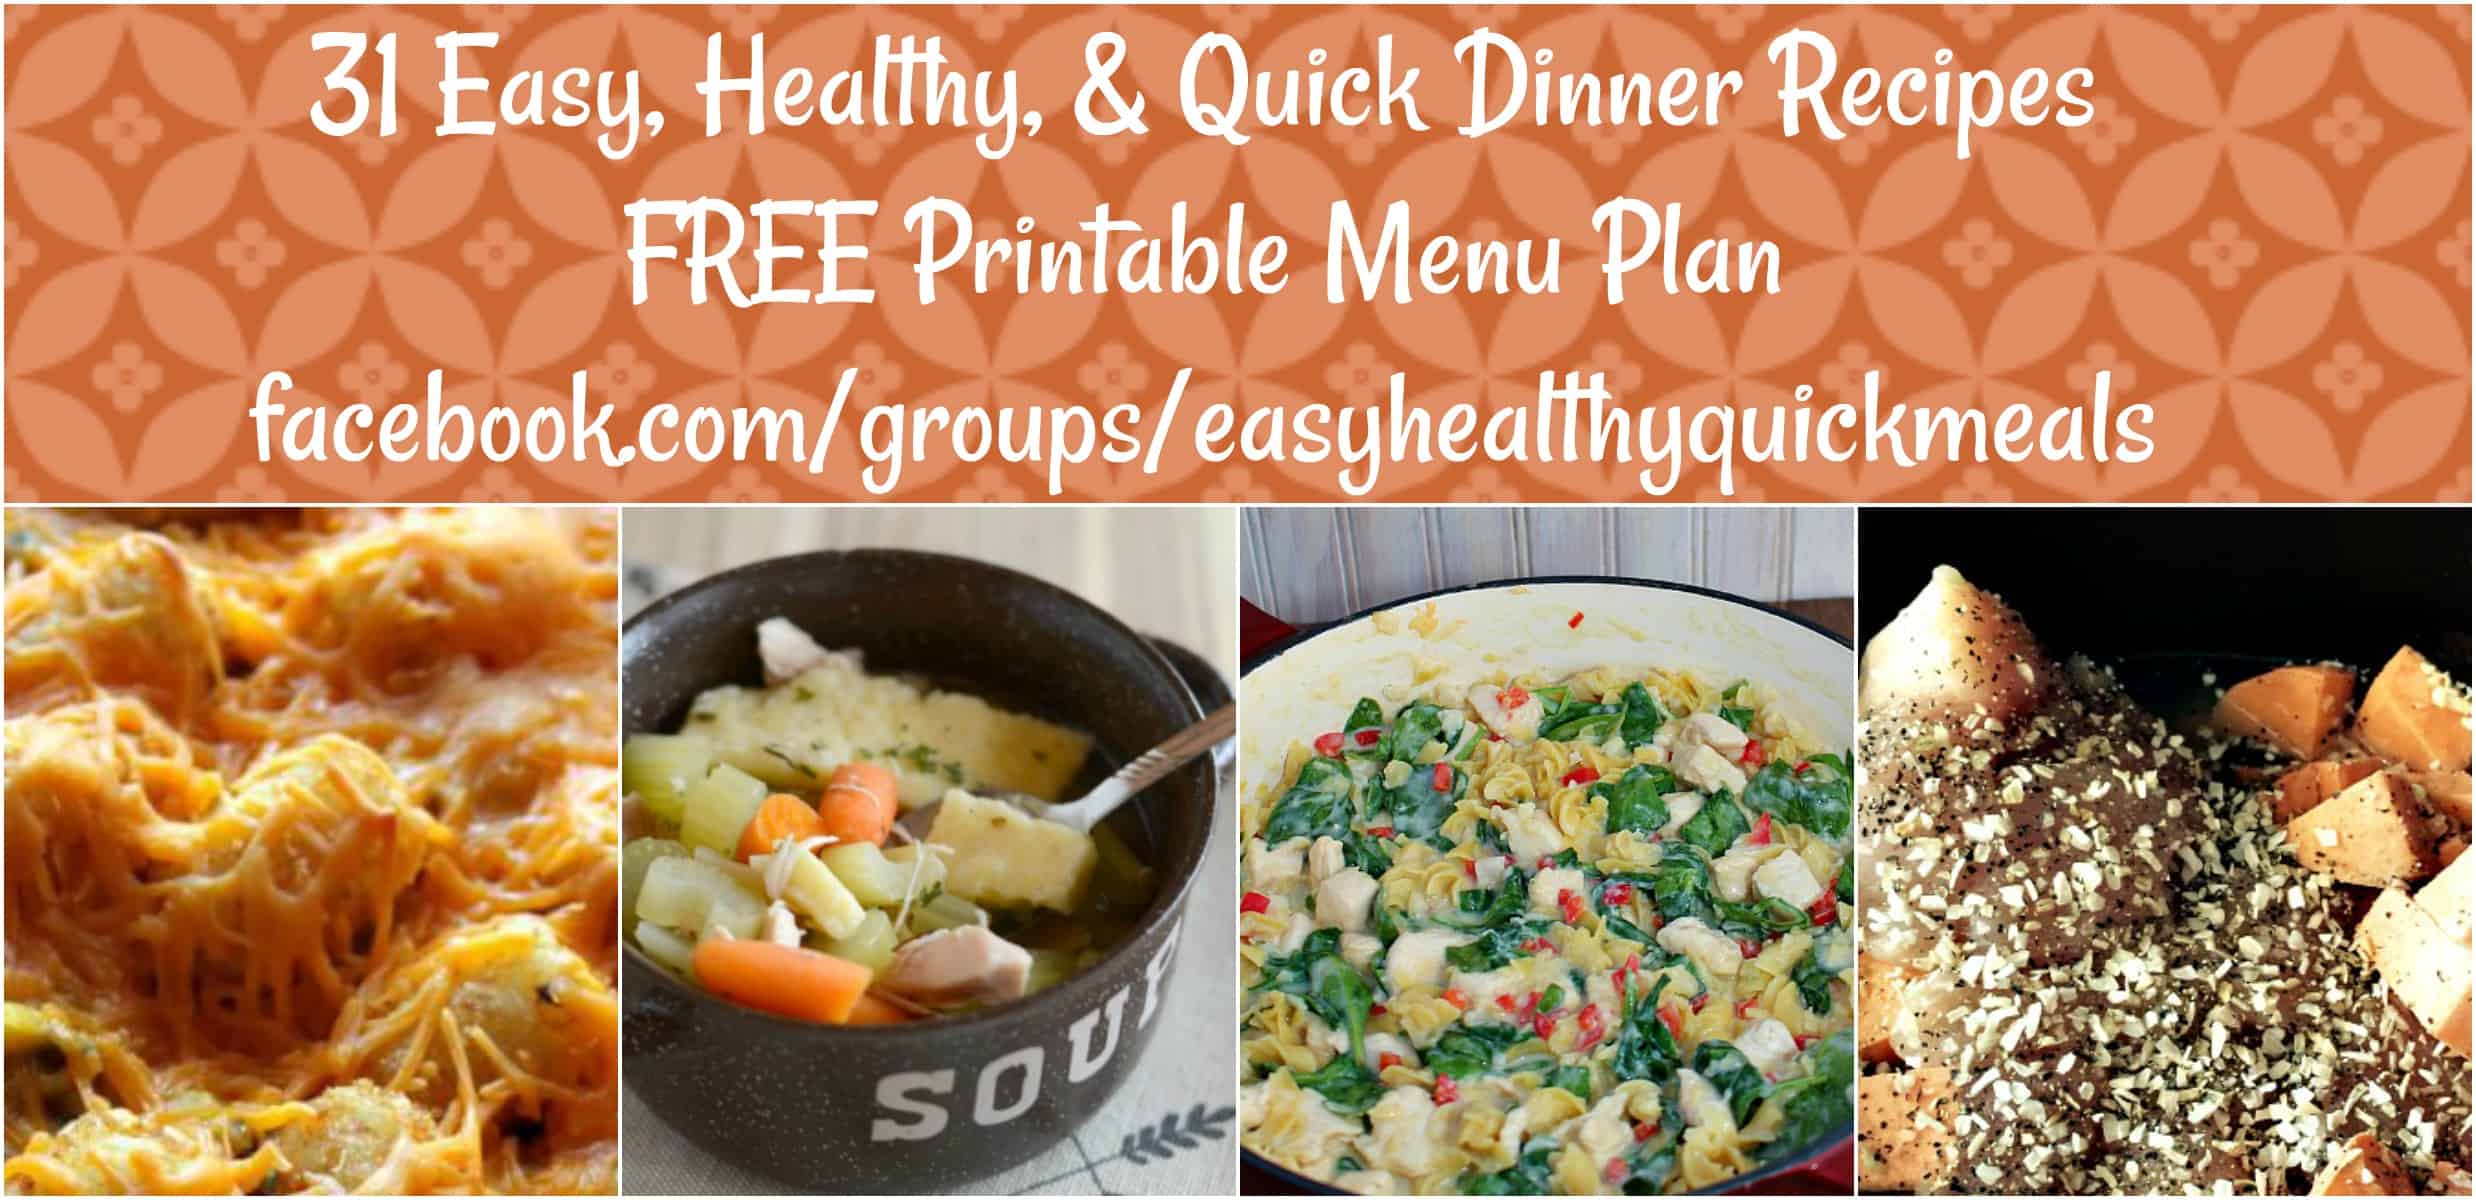 October Menu Plan with 31 healthy dinners